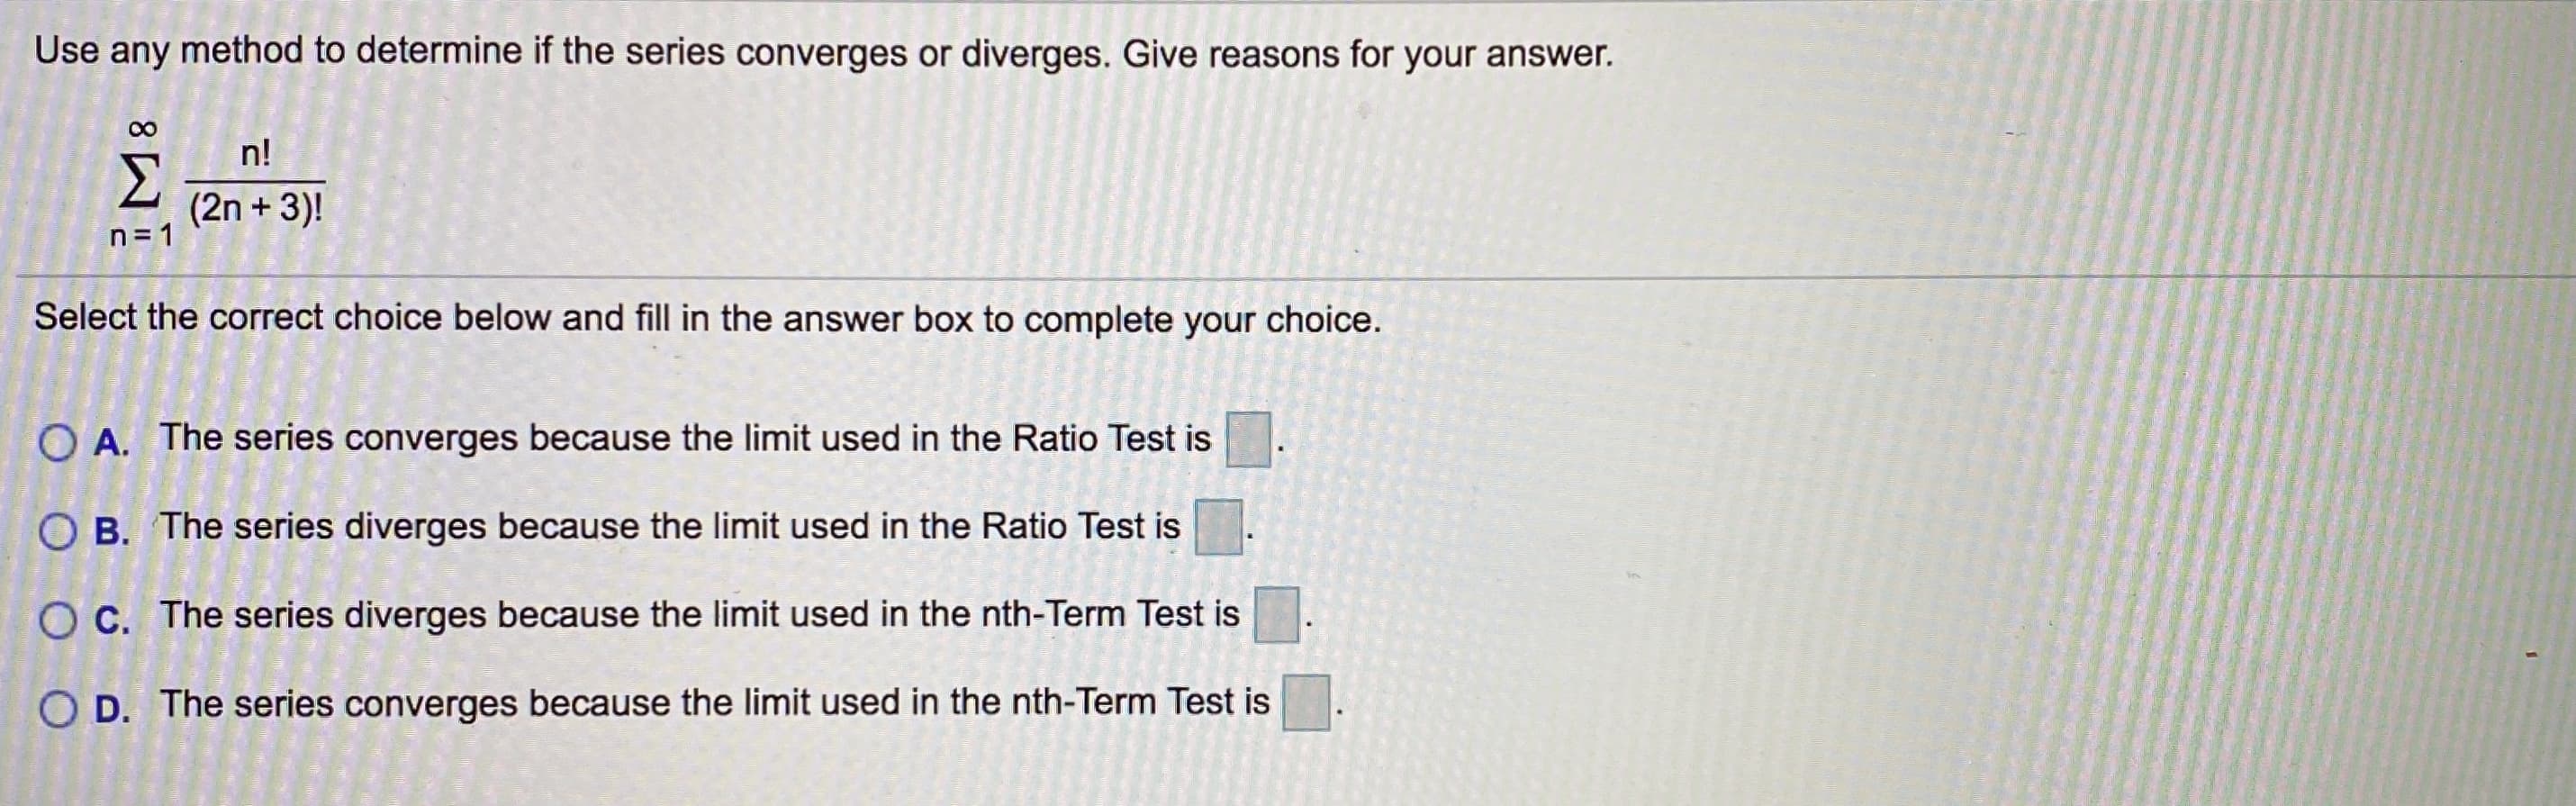 Use any method to determine if the series converges or diverges. Give reasons for your answer.
n!
Σ
(2n + 3)!
n = 1
Select the correct choice below and fill in the answer box to complete your choice.
O A. The series converges because the limit used in the Ratio Test is
O B. The series diverges because the limit used in the Ratio Test is
O C. The series diverges because the limit used in the nth-Term Test is
O D. The series converges because the limit used in the nth-Term Test is
8.
